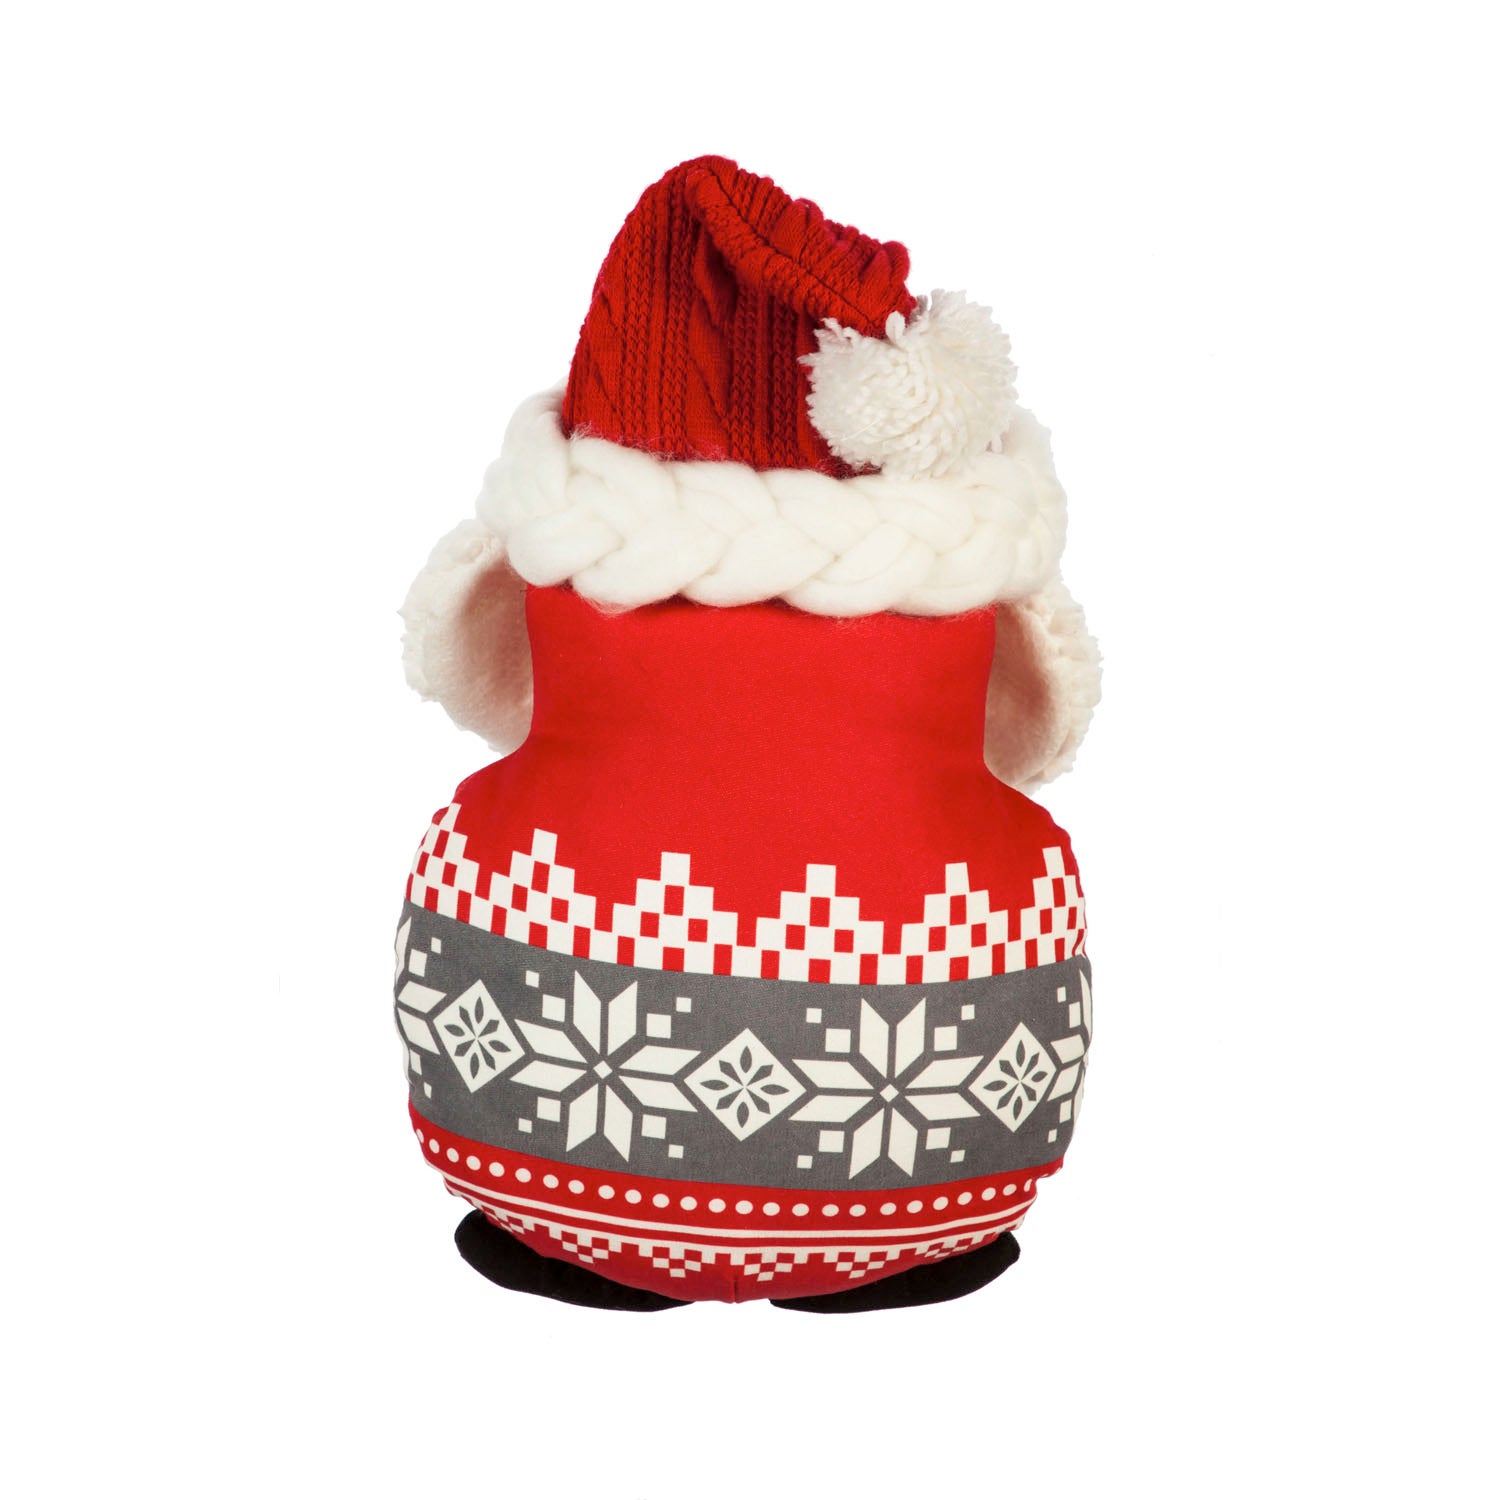 Gnome Shaped Pillow with Snowflake Sweater